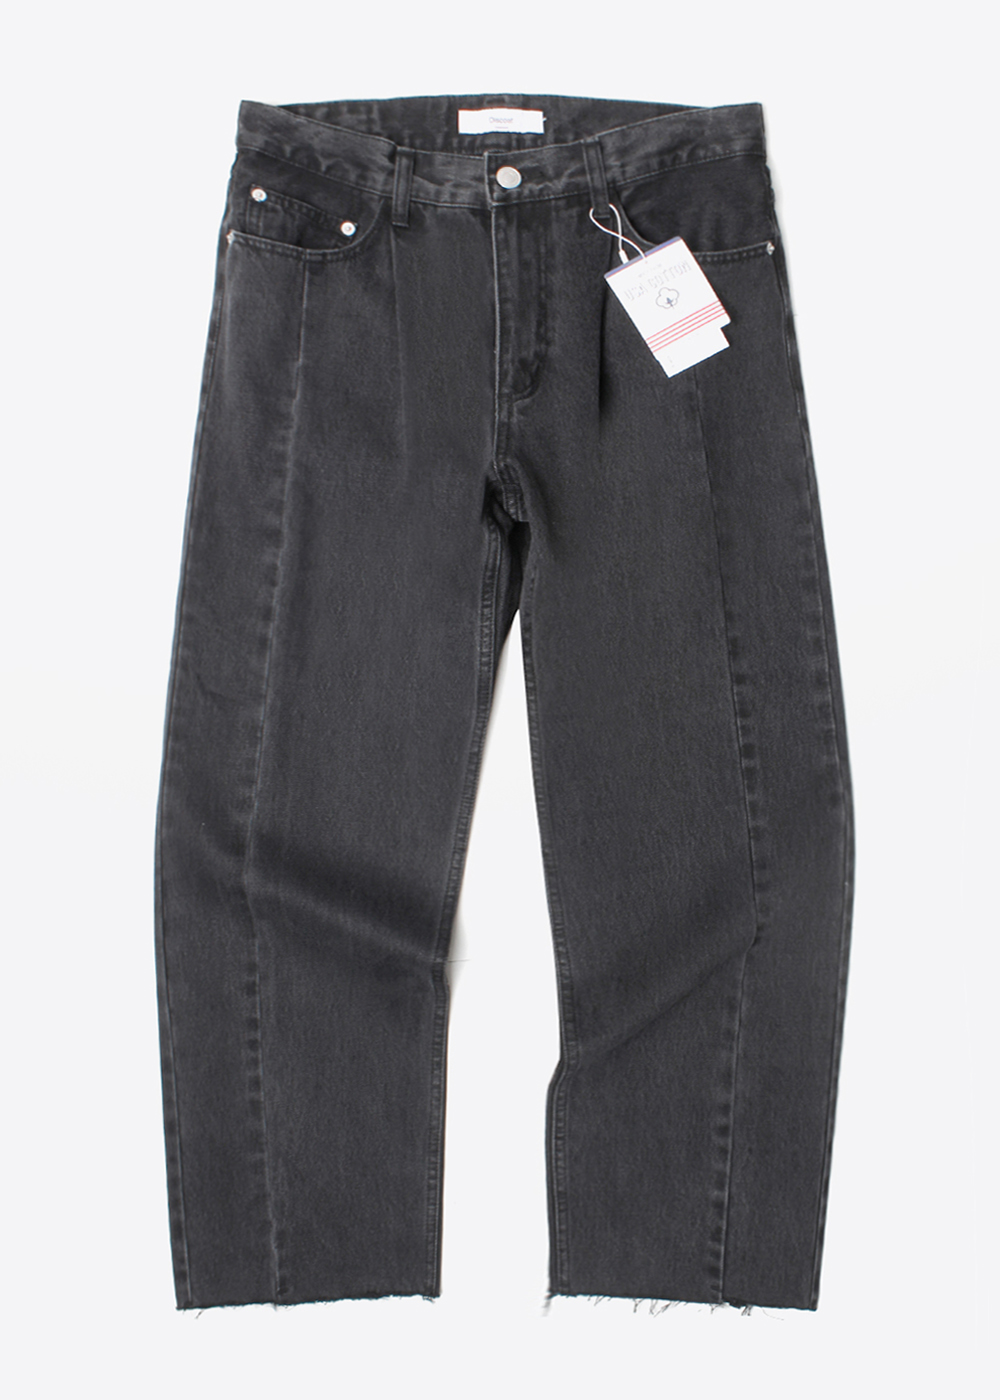 DISCAOT’loose straight fit’ cut-off denim pant